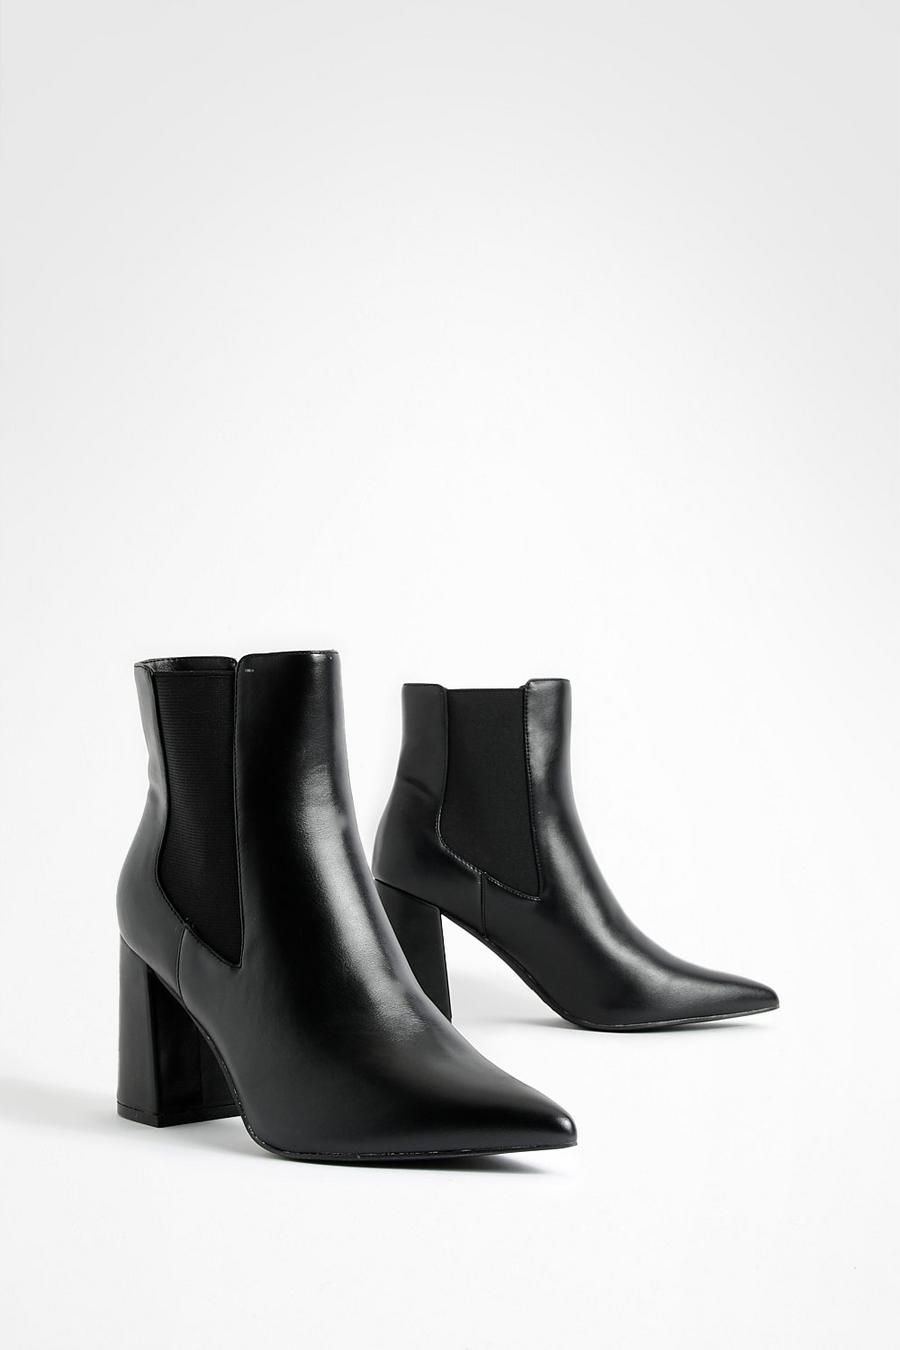 Black Pu Block Heel Pointed Toe Ankle Boots 